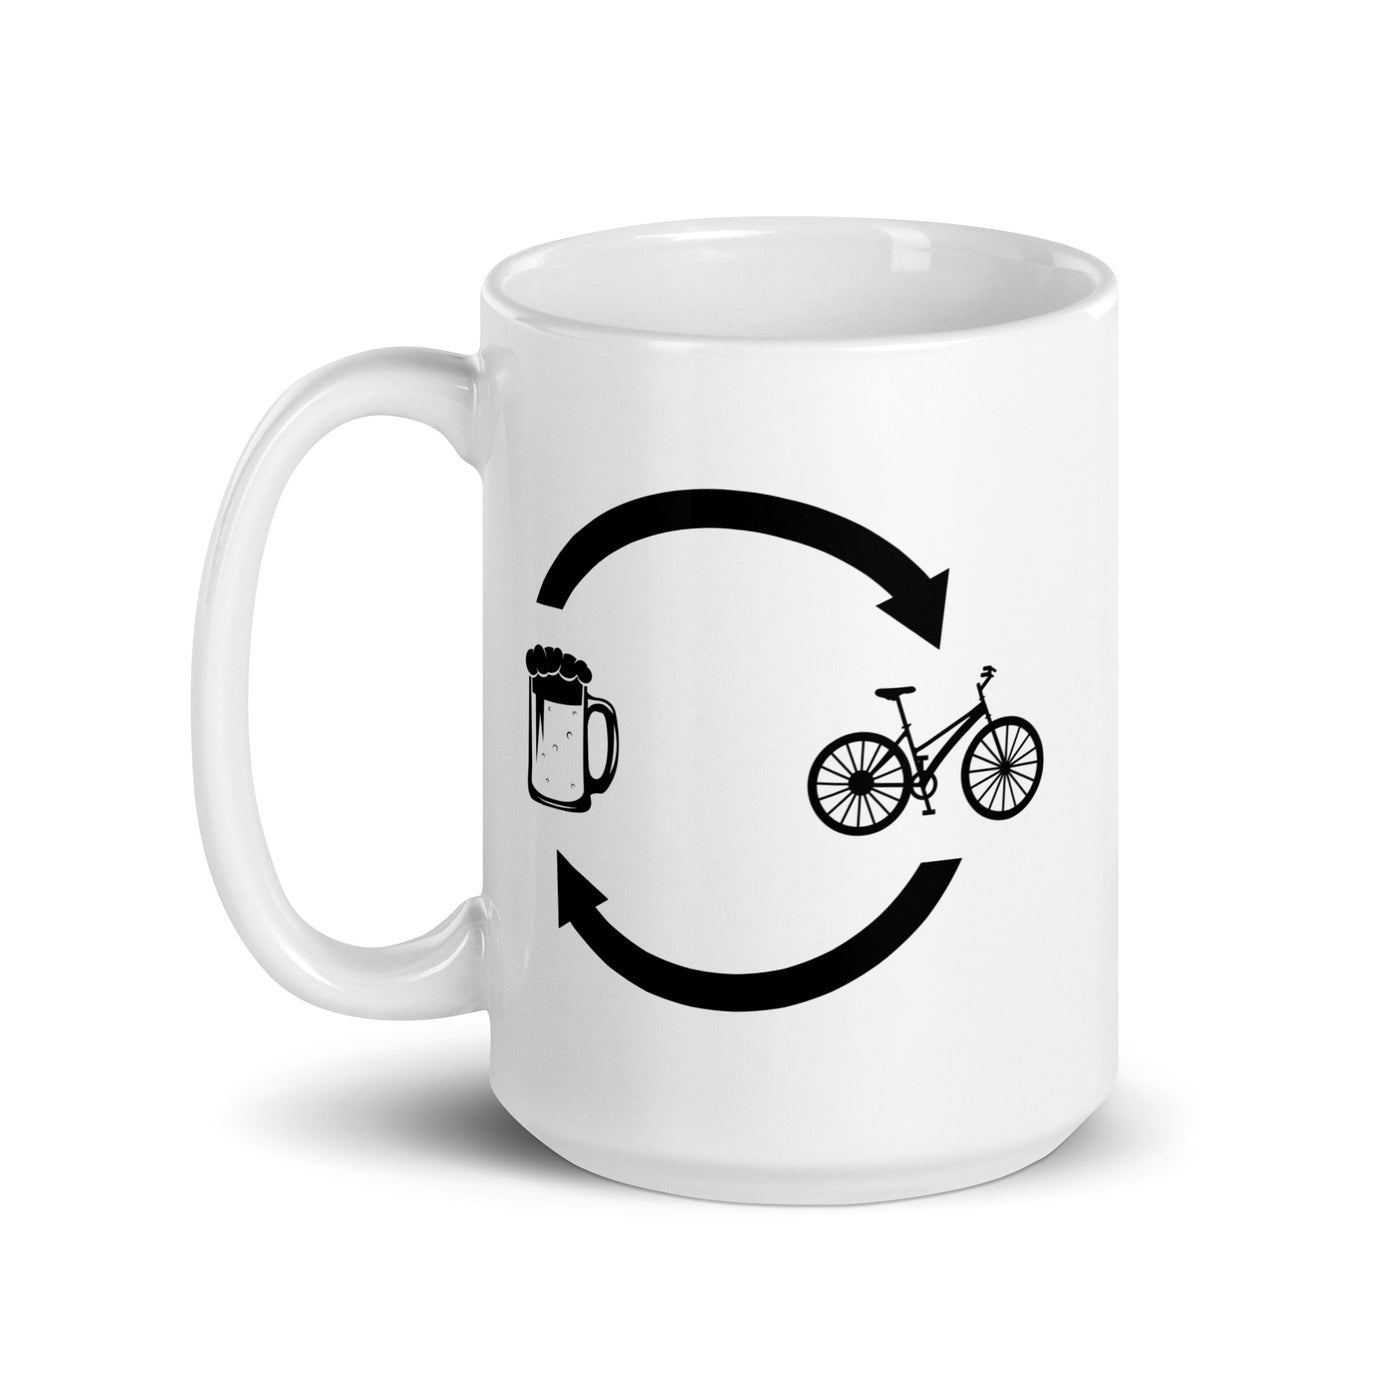 Beer Loading Arrows And Cycling - Tasse fahrrad